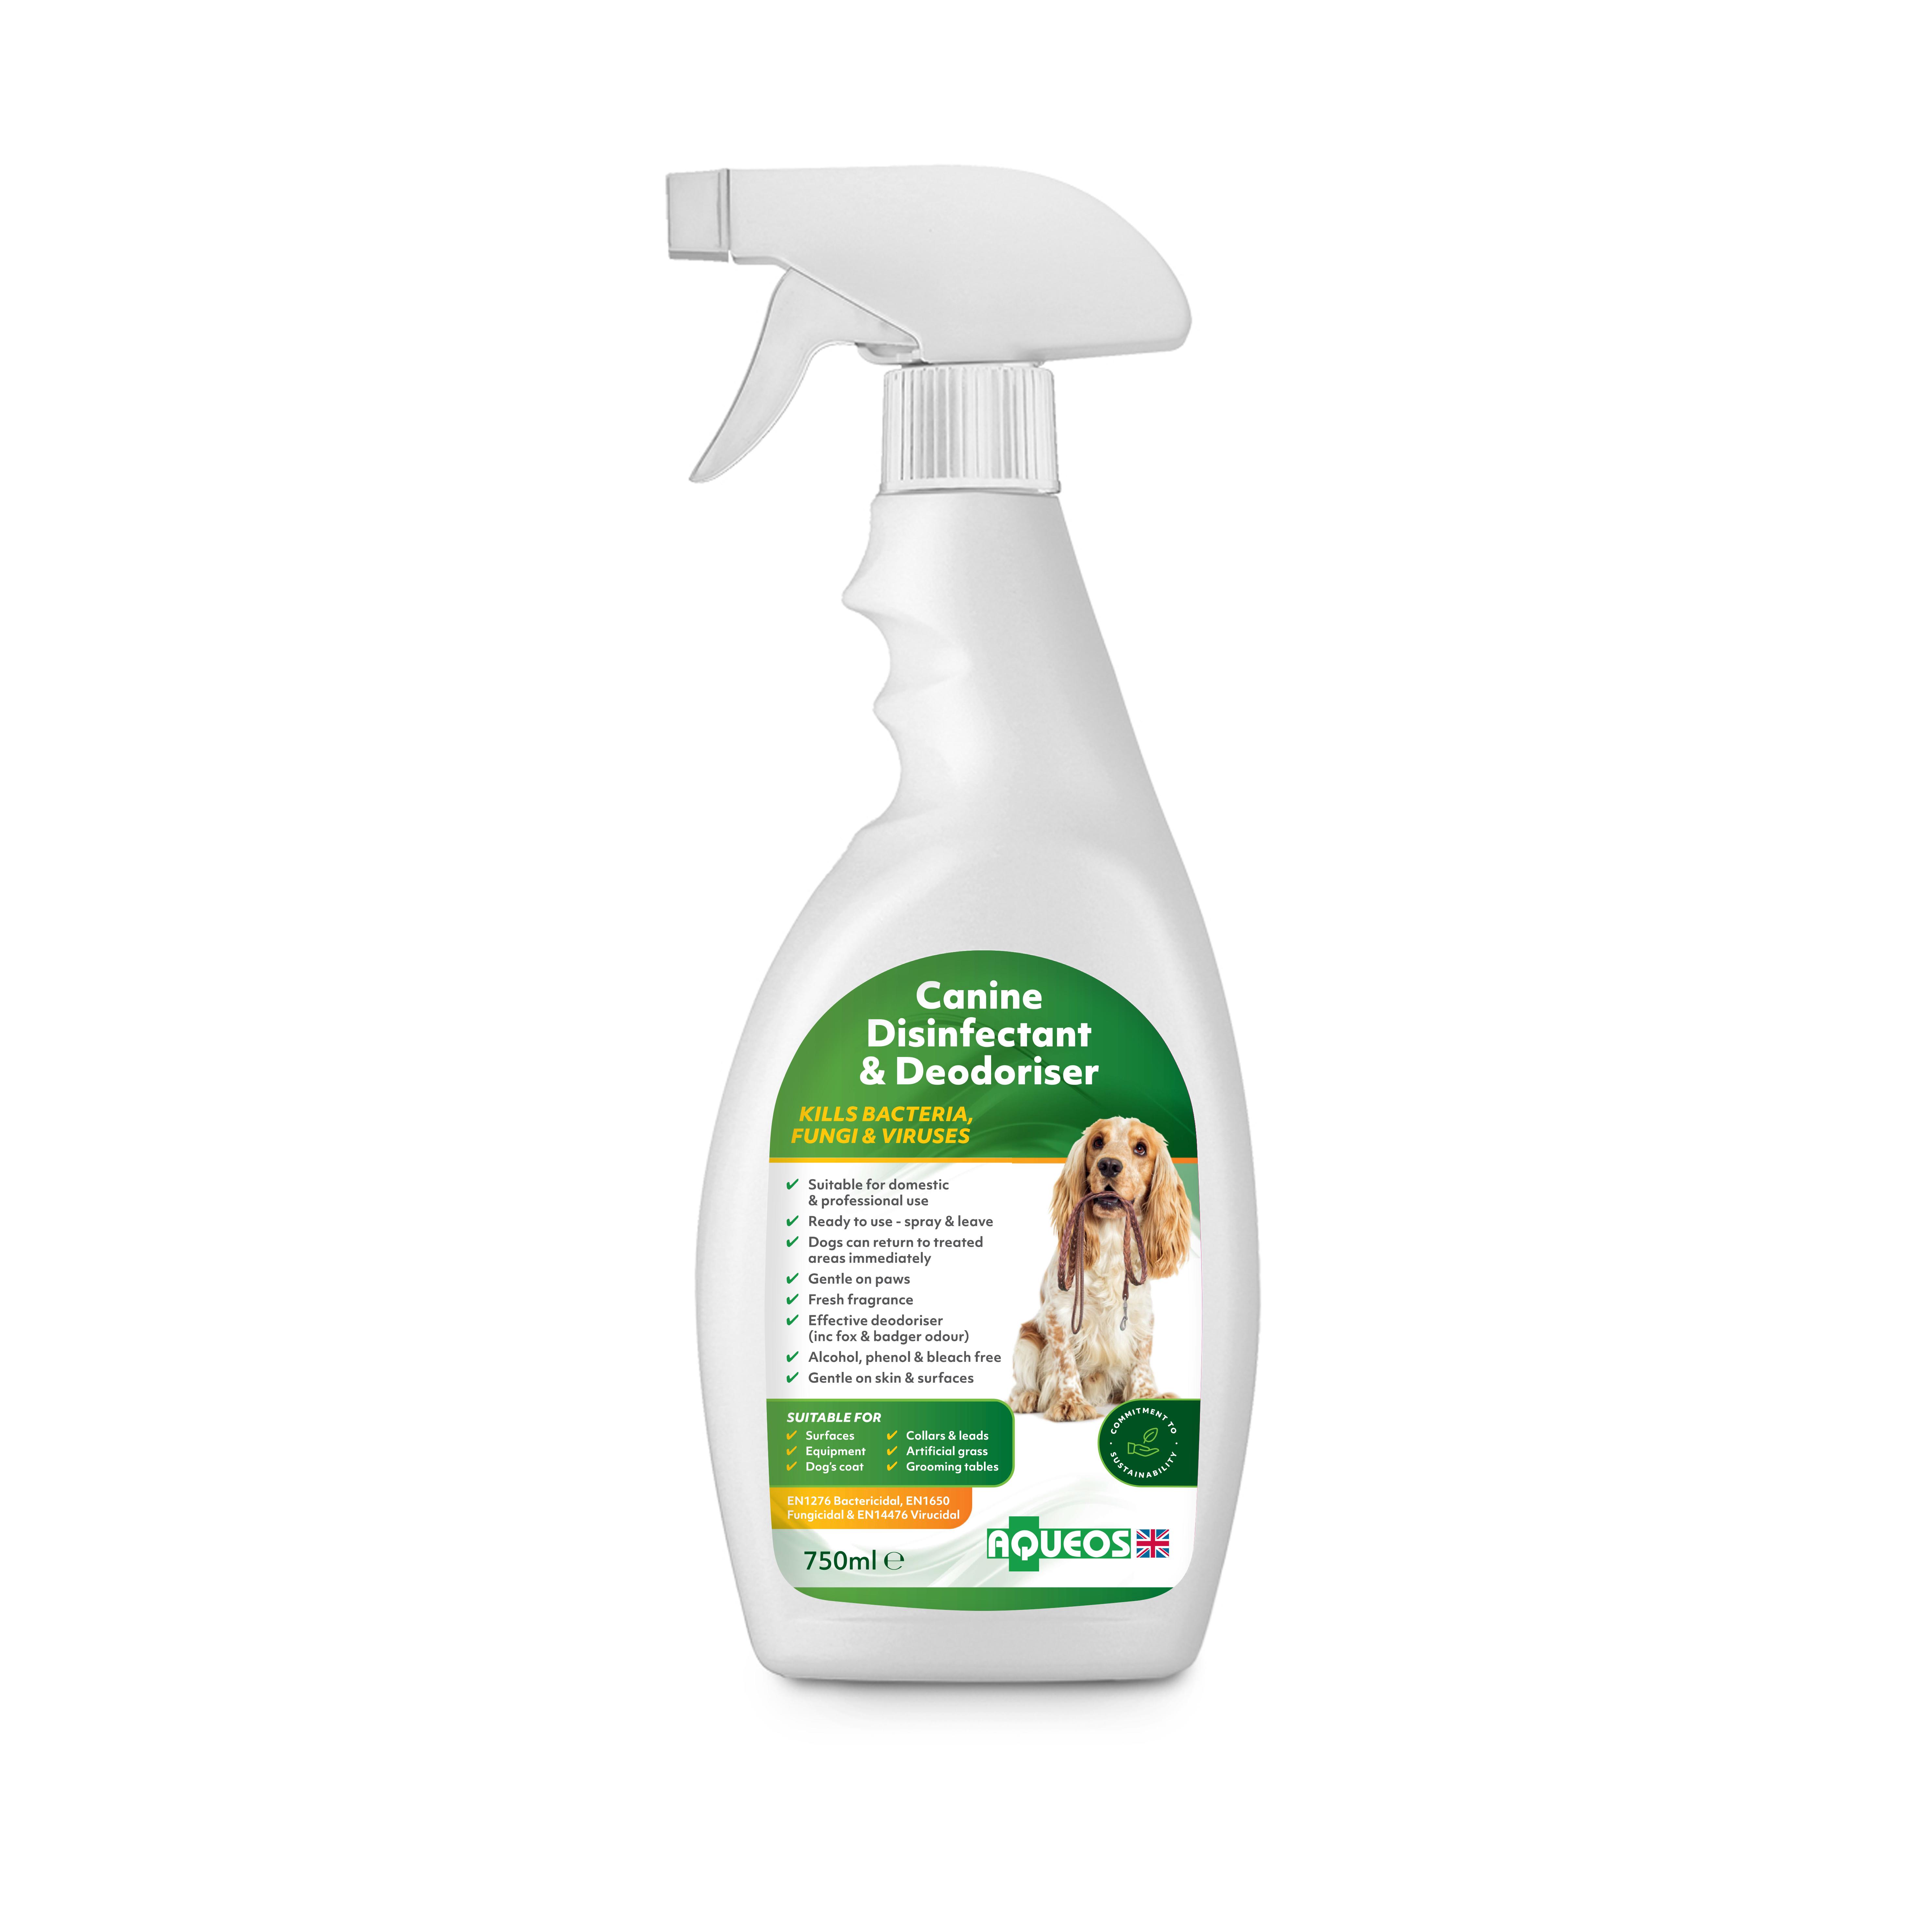 Disinfectant and deodoriser for dogs